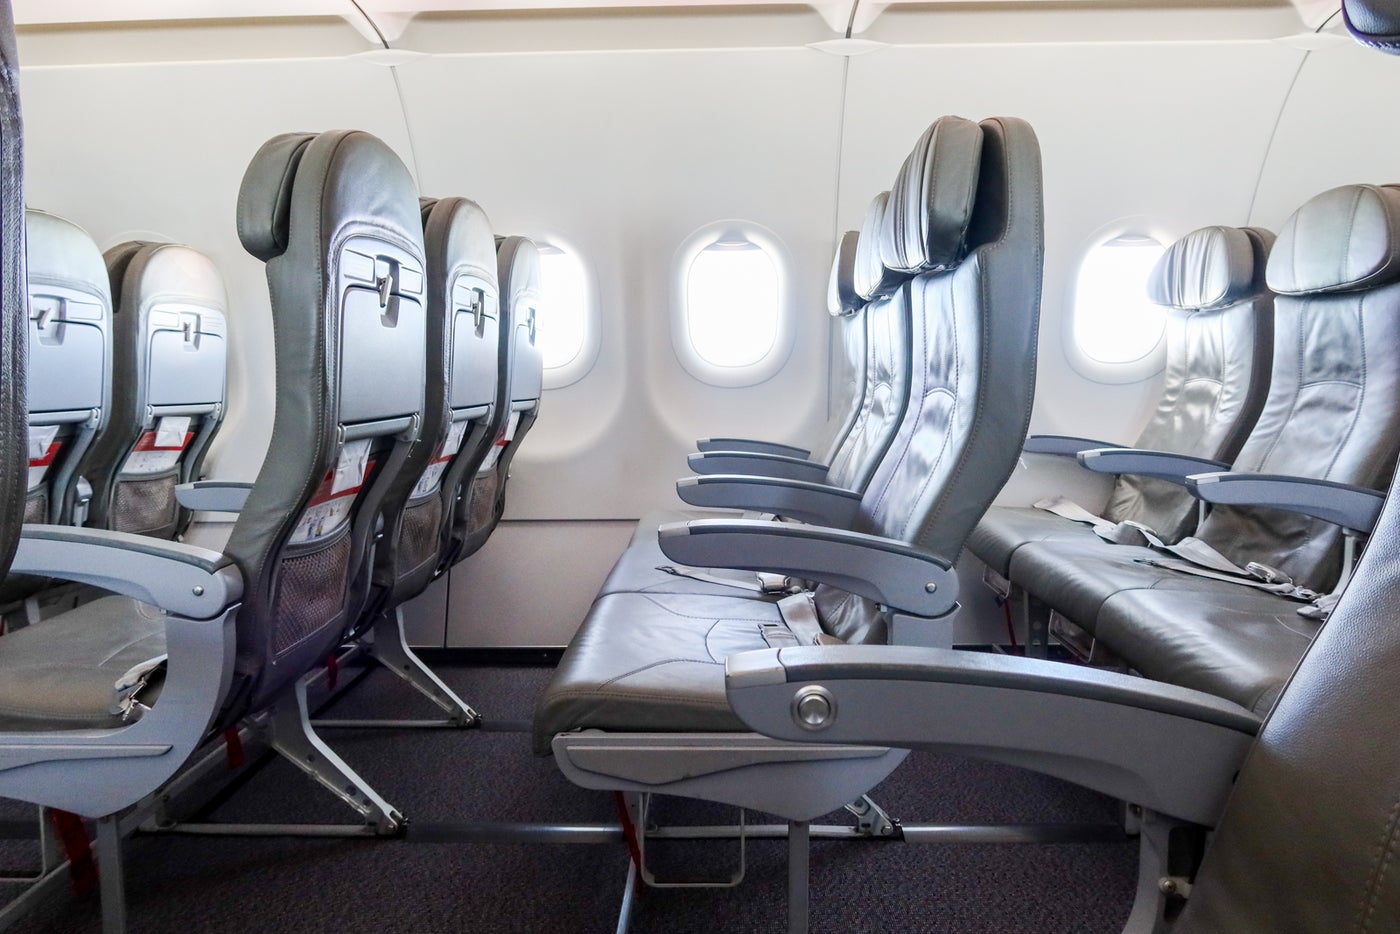 Play: 7 reasons flying Iceland's newest airline was a great experience